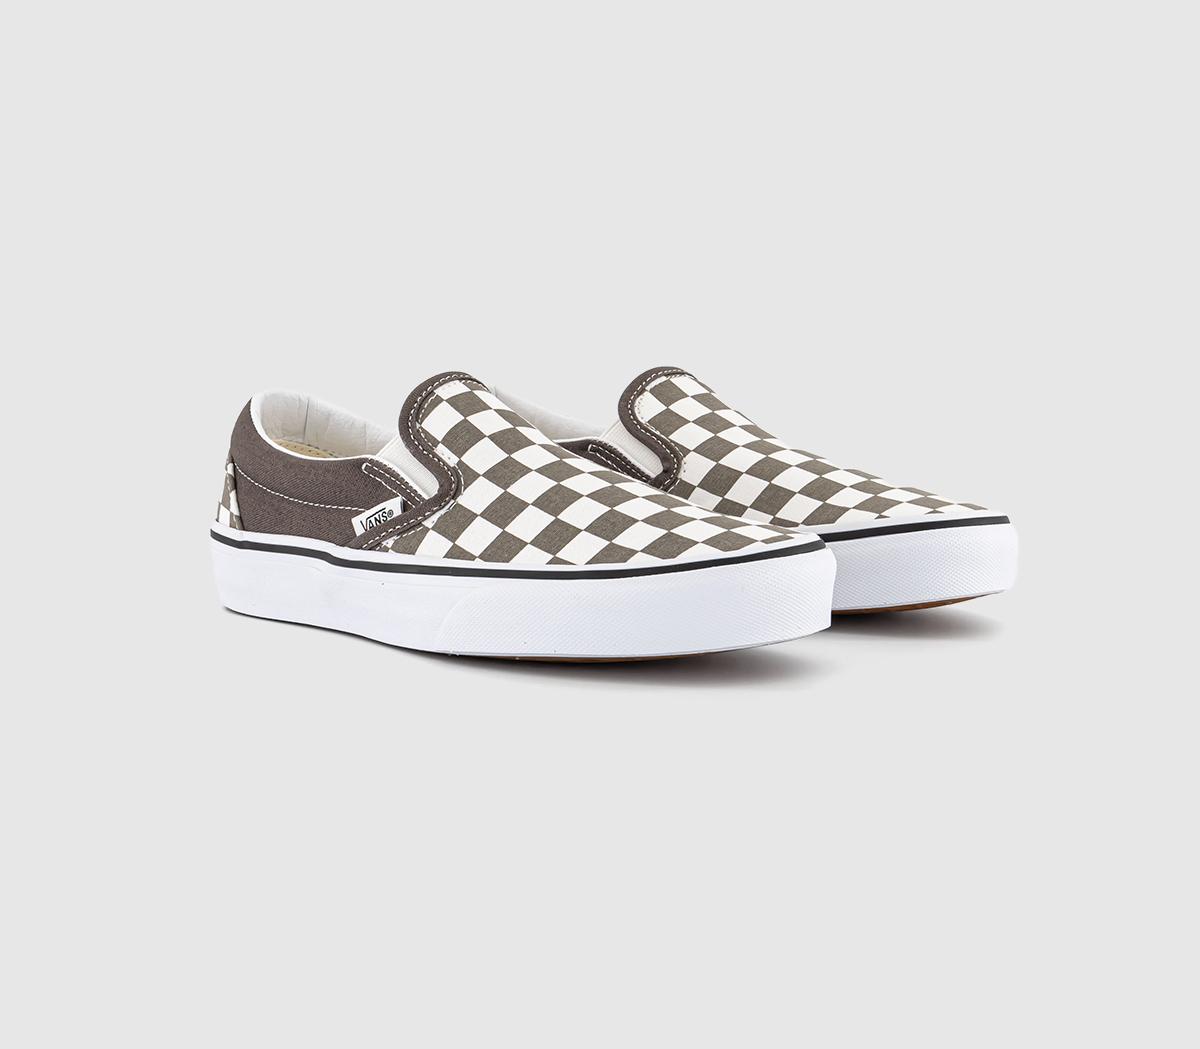 Vans Classic Slip On Trainers Color Theory Checkerboard Bungee Cord Brown/White, 7